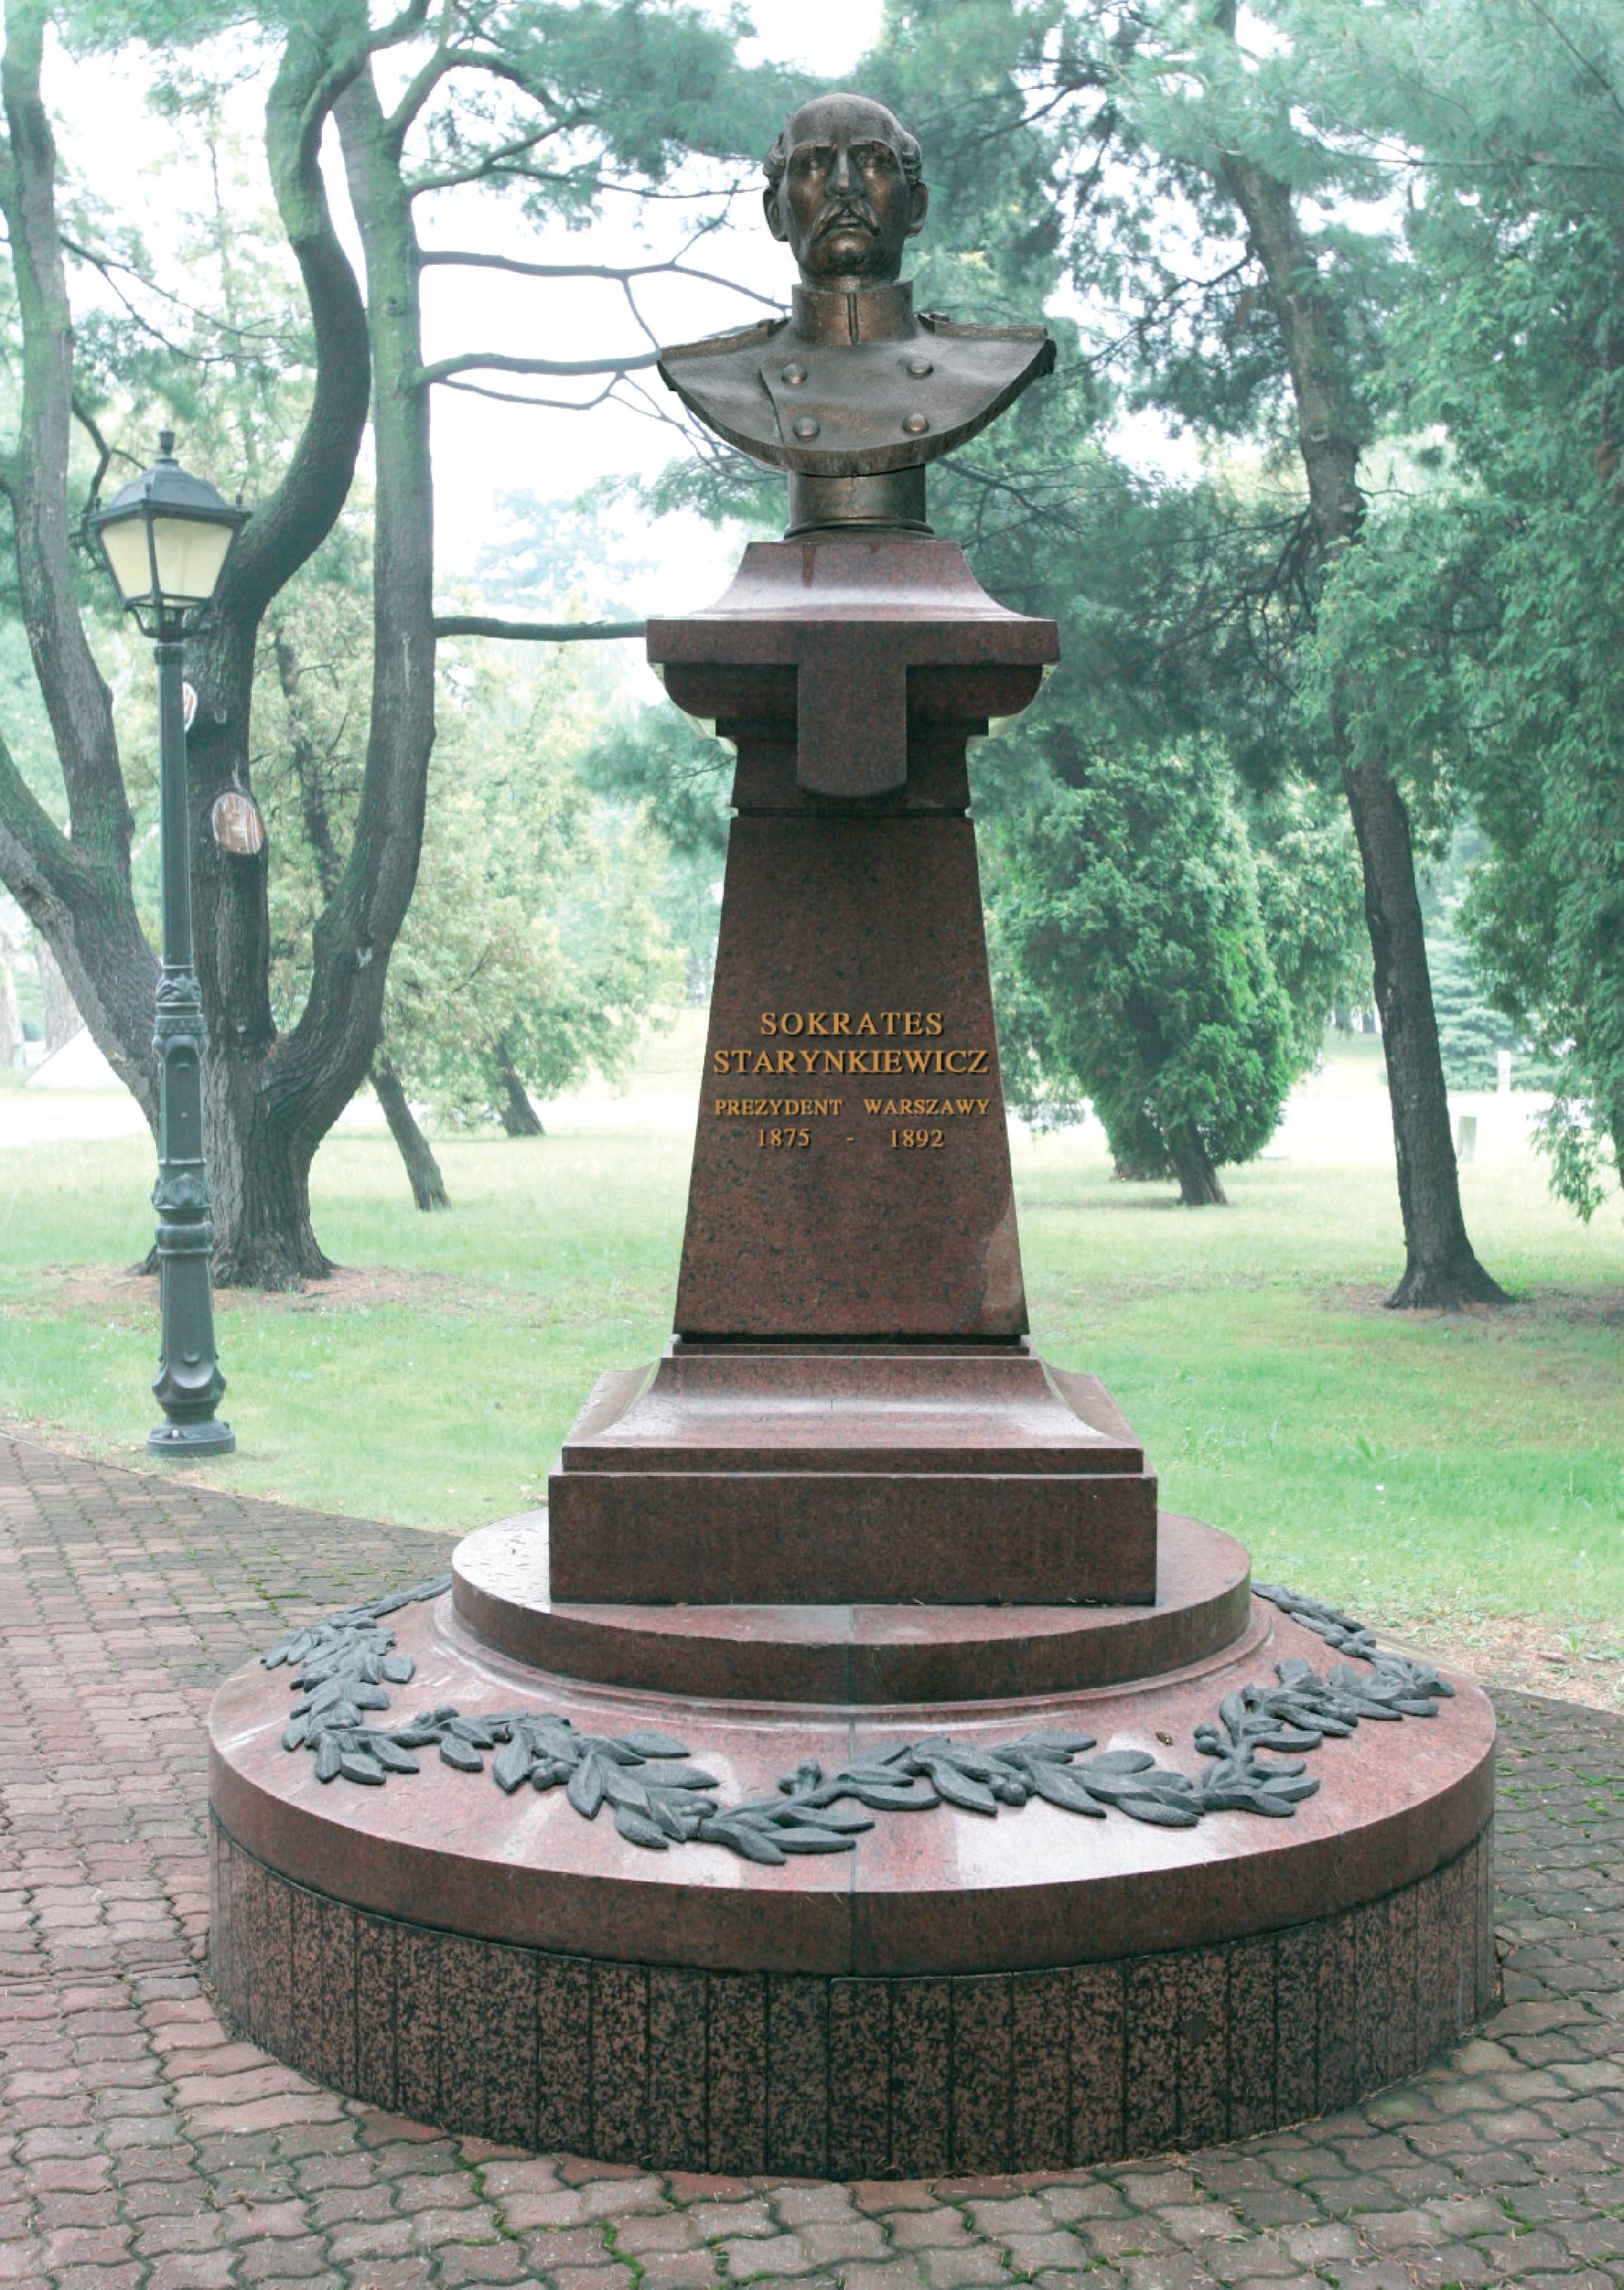 Monument of General Sokrat Starynkiewicz, one of the Polish-Russian School's patrons